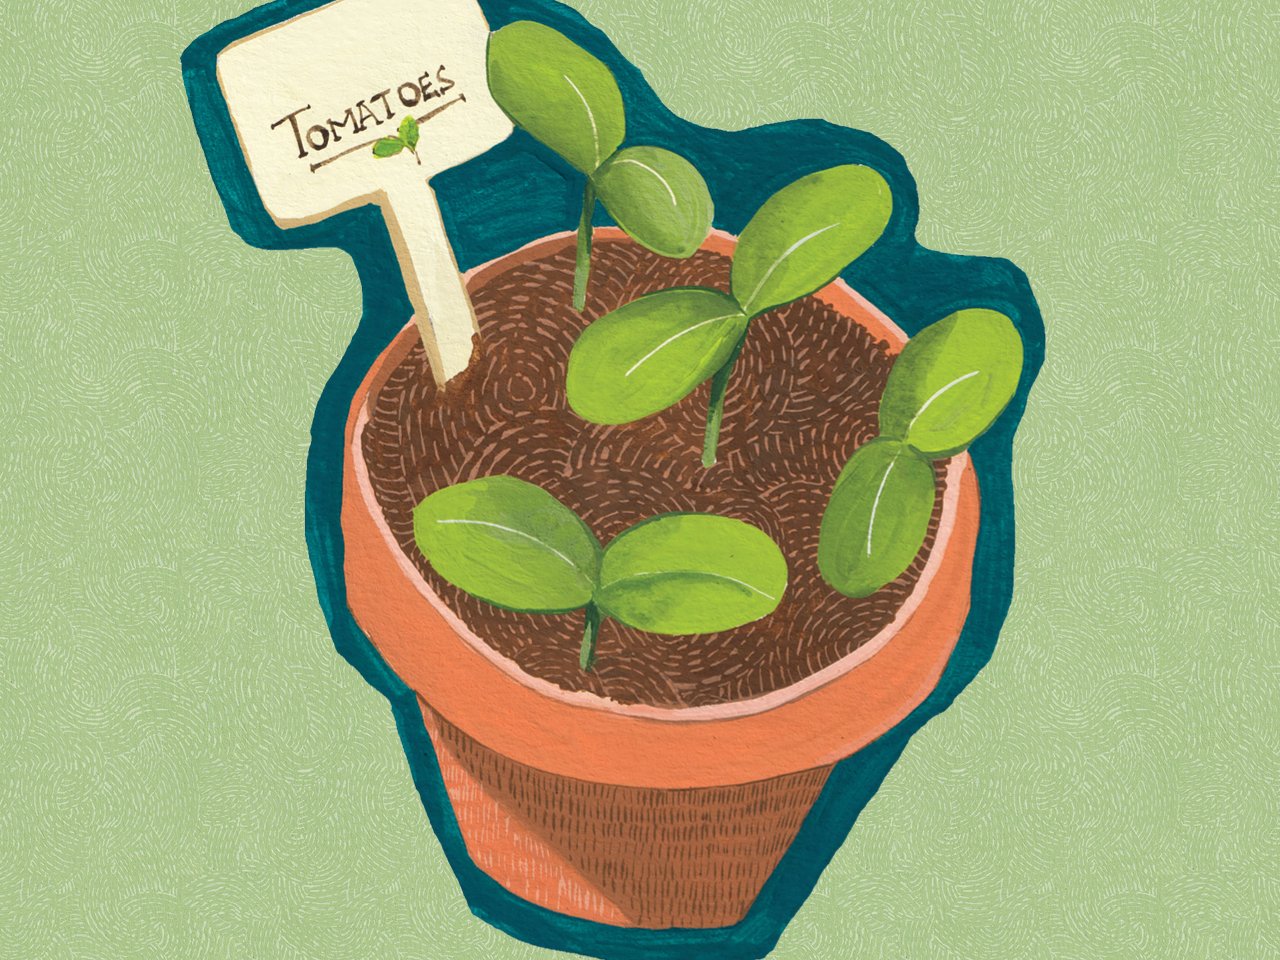 An illustration of a tomato seedling in a terracotta pot against a green background.